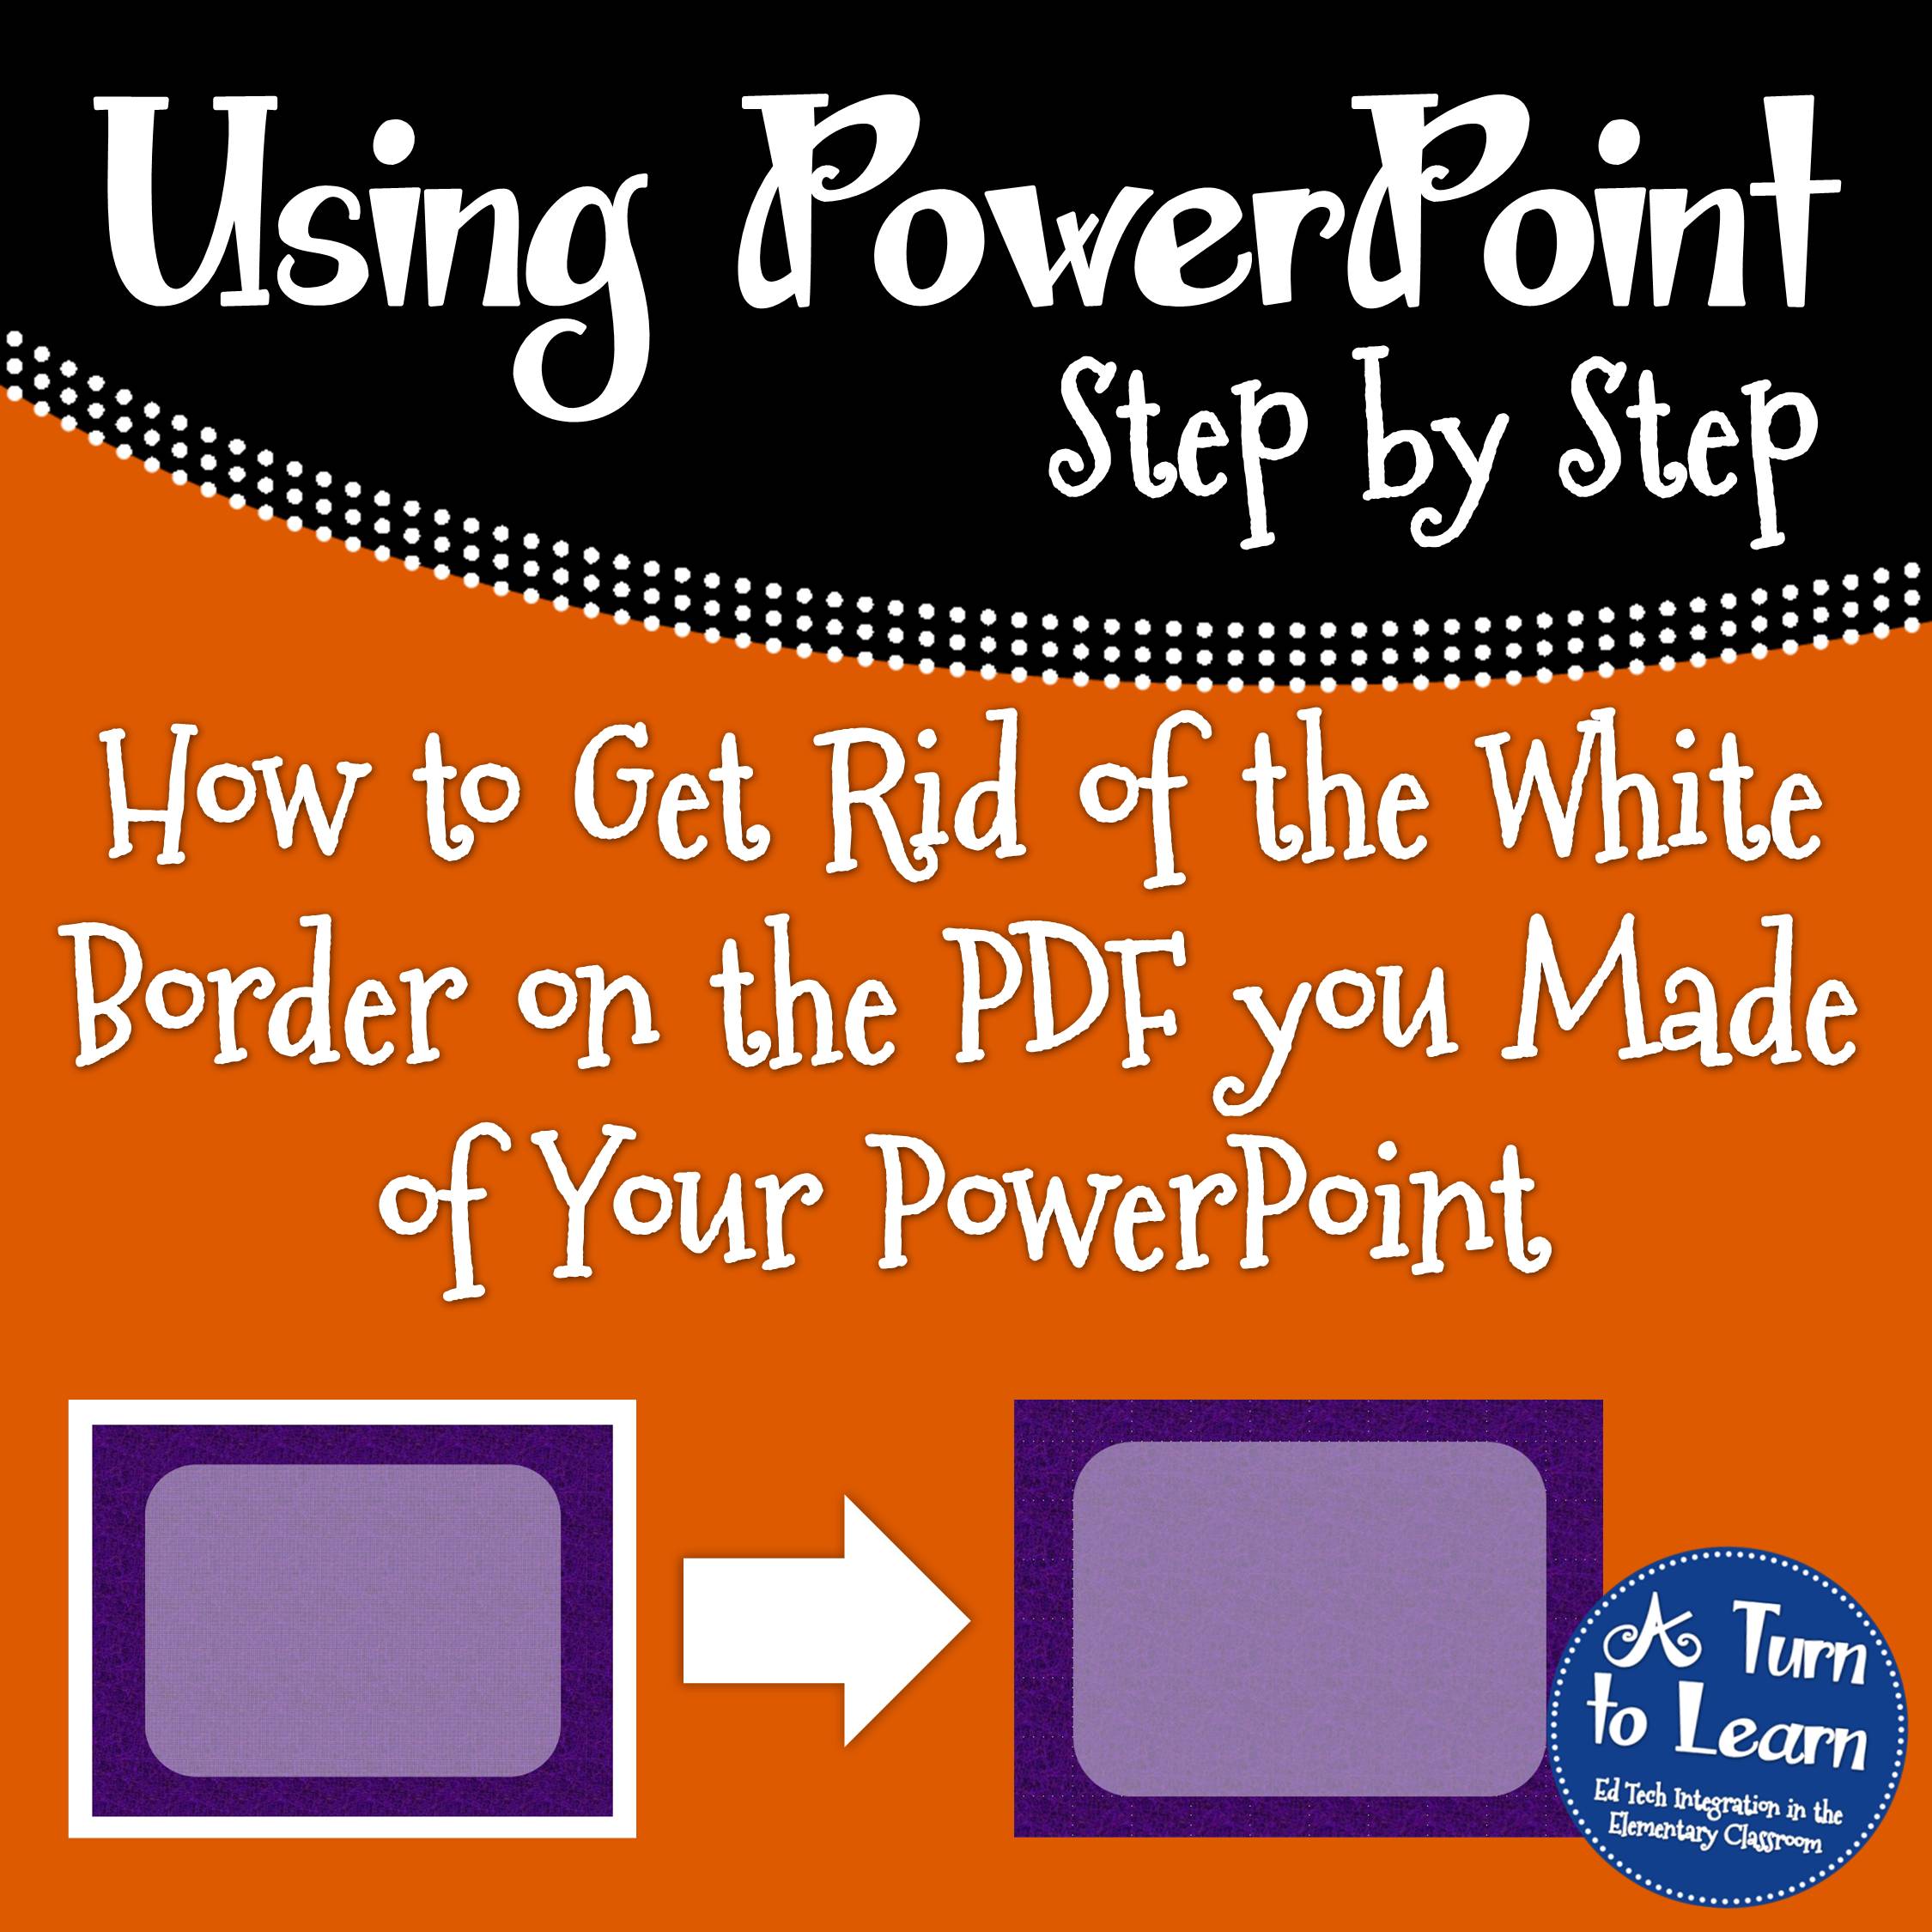 How to Get Rid of the White Border on the PDF of Your PowerPoint